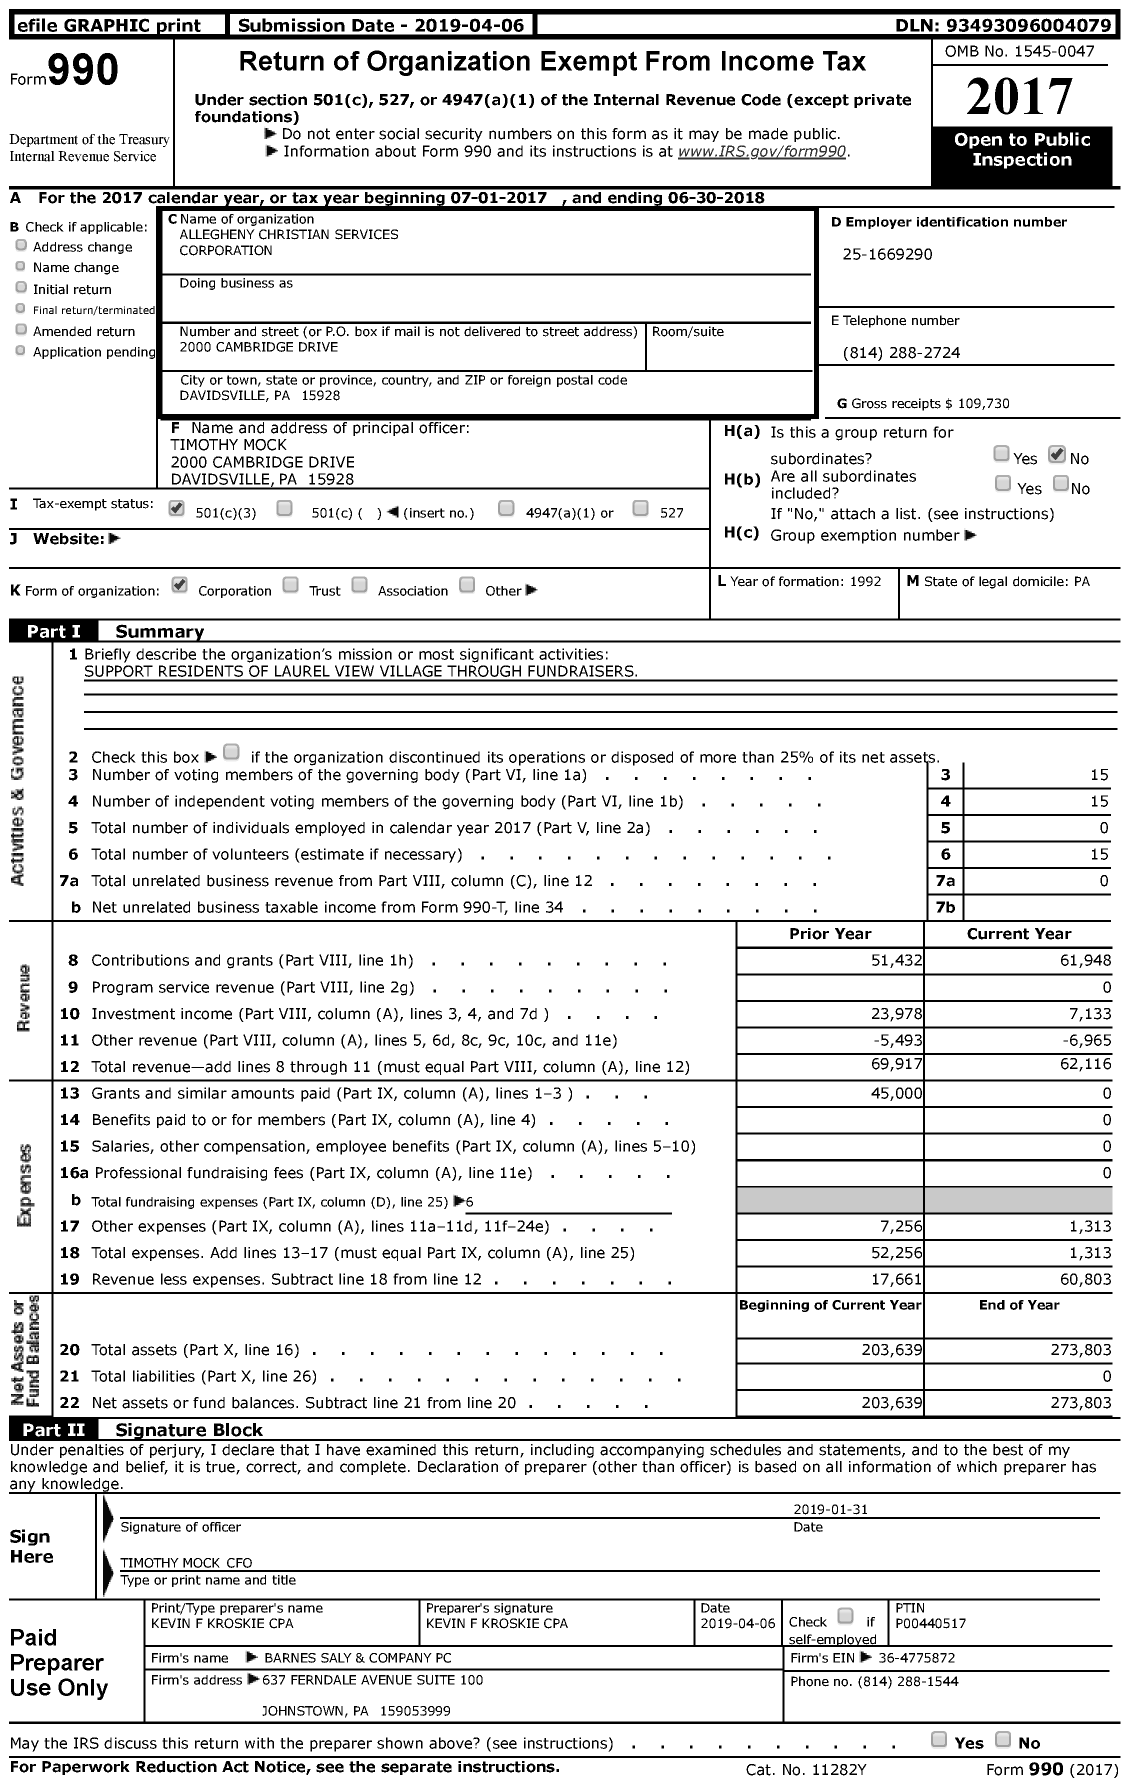 Image of first page of 2017 Form 990 for Allegheny Christian Services Corporation